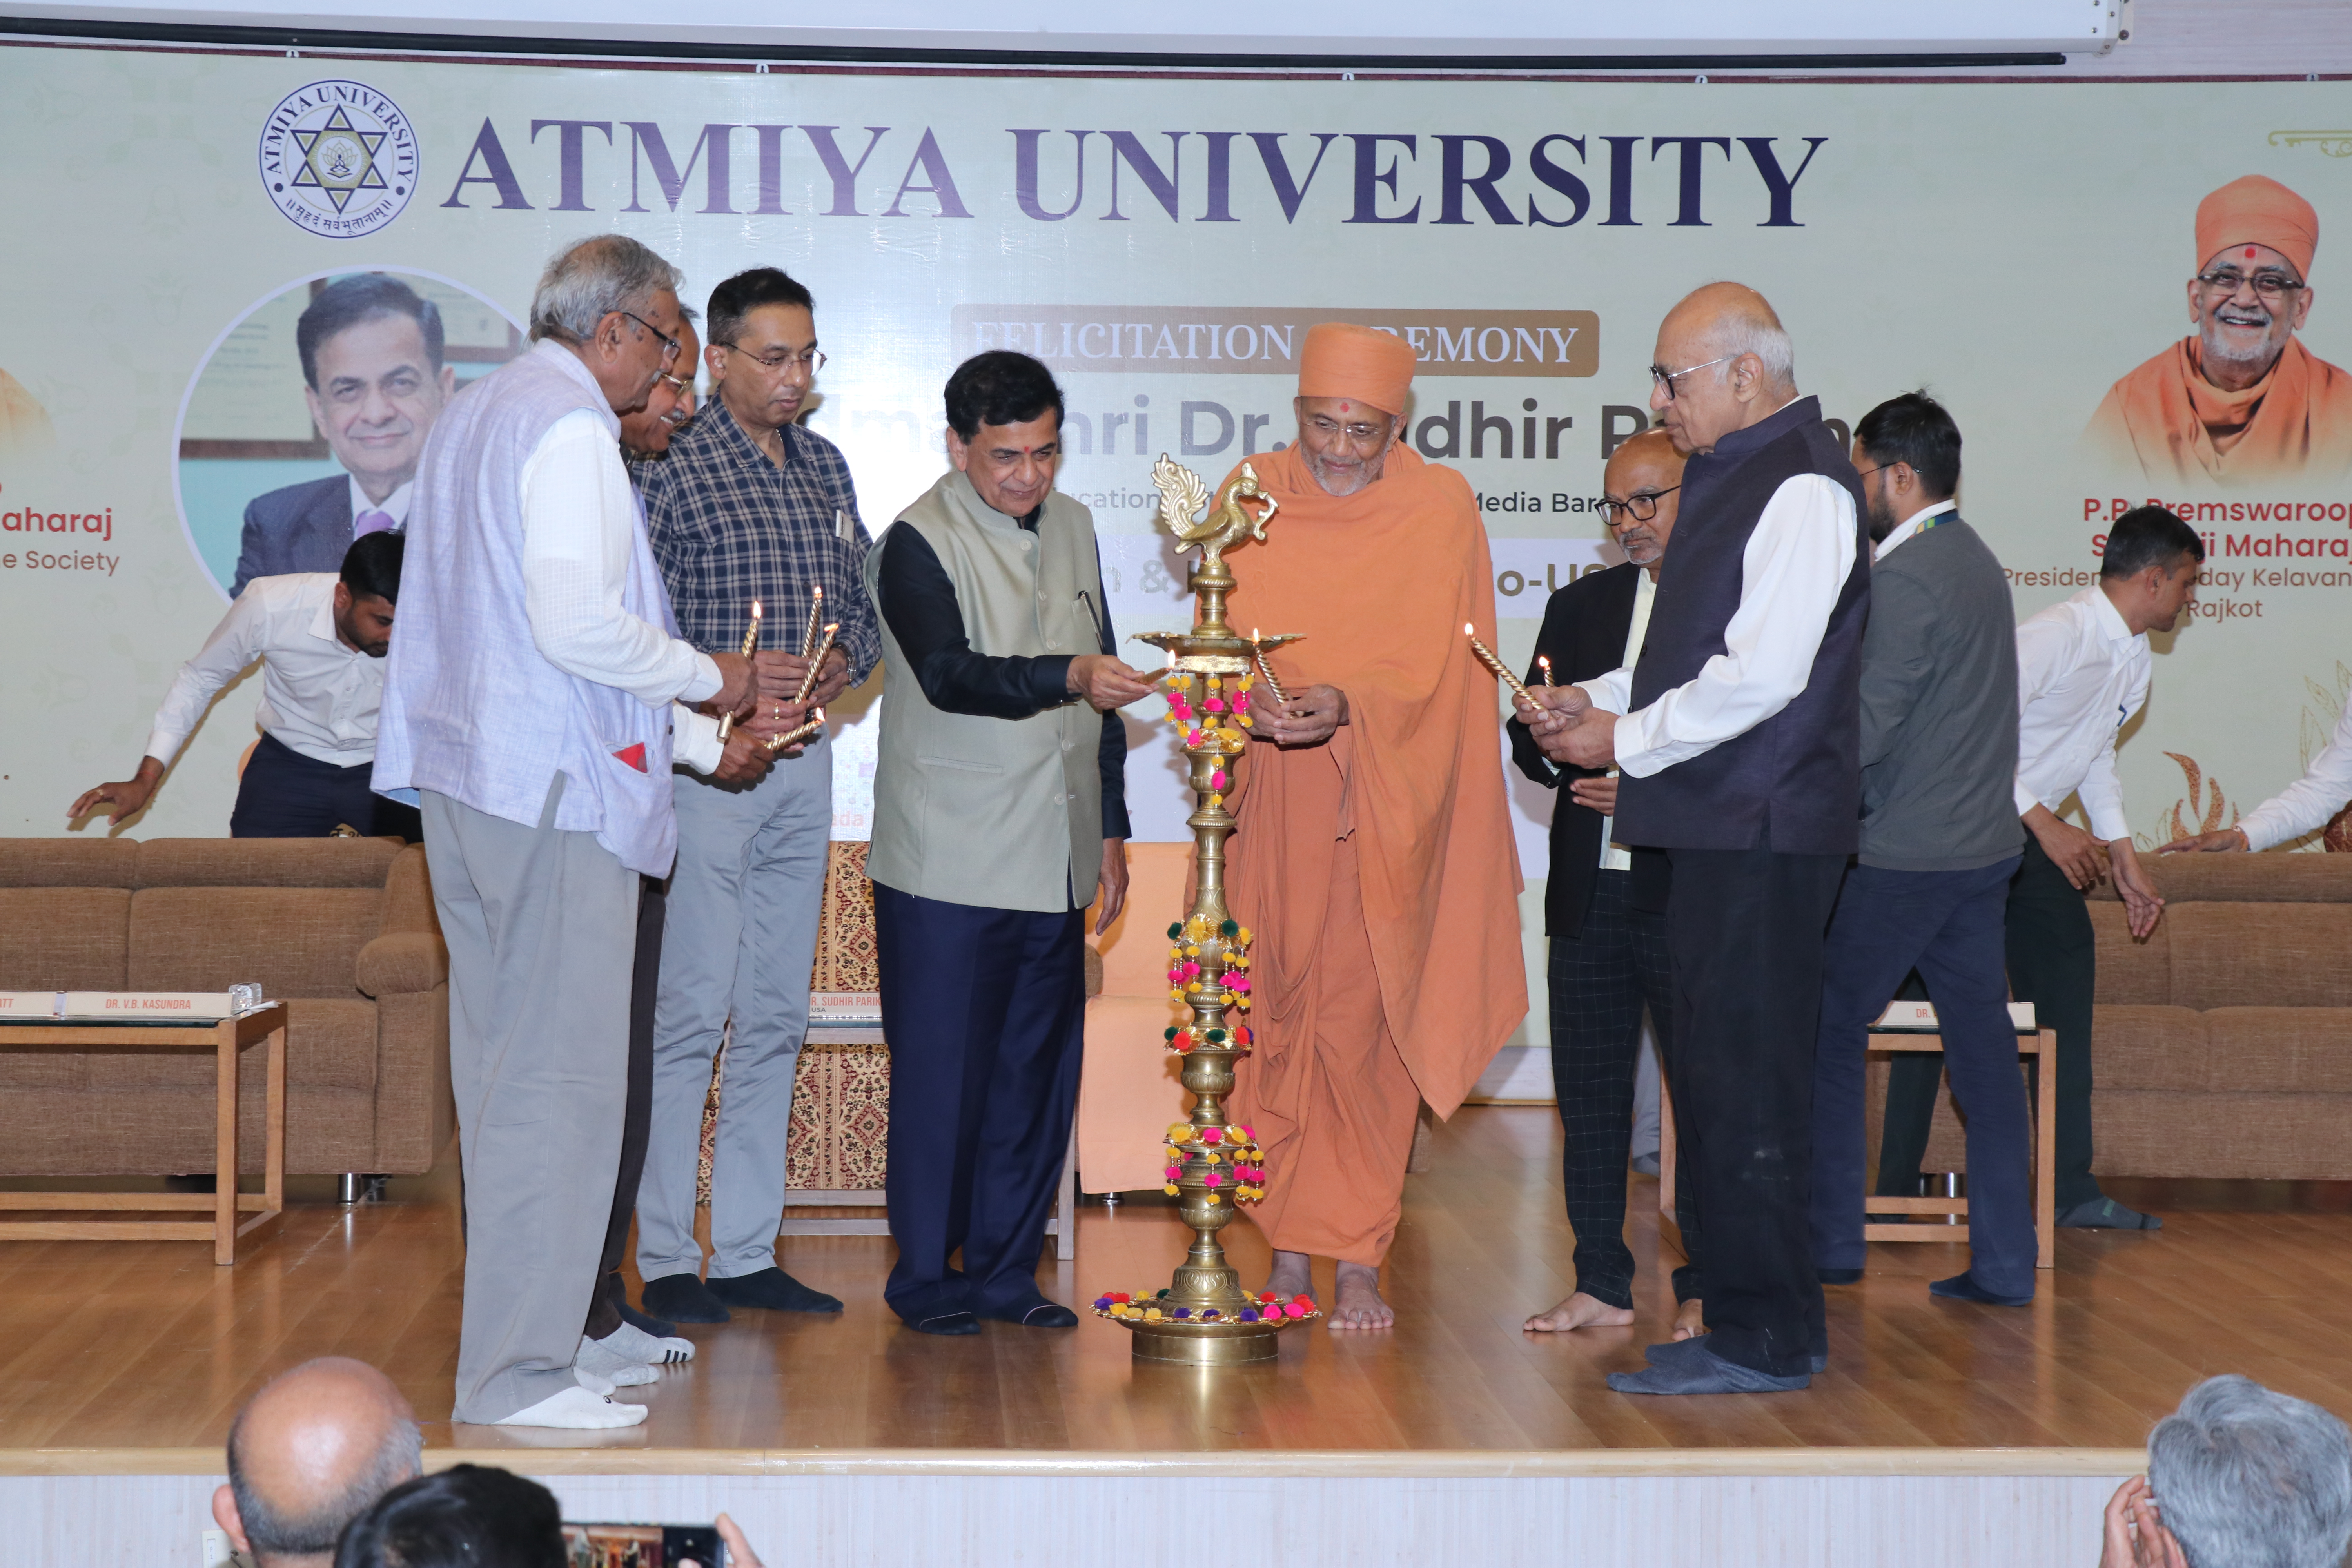 Atmiya College honors Dr. Sudhir Parikh for philanthropic work in schooling in India